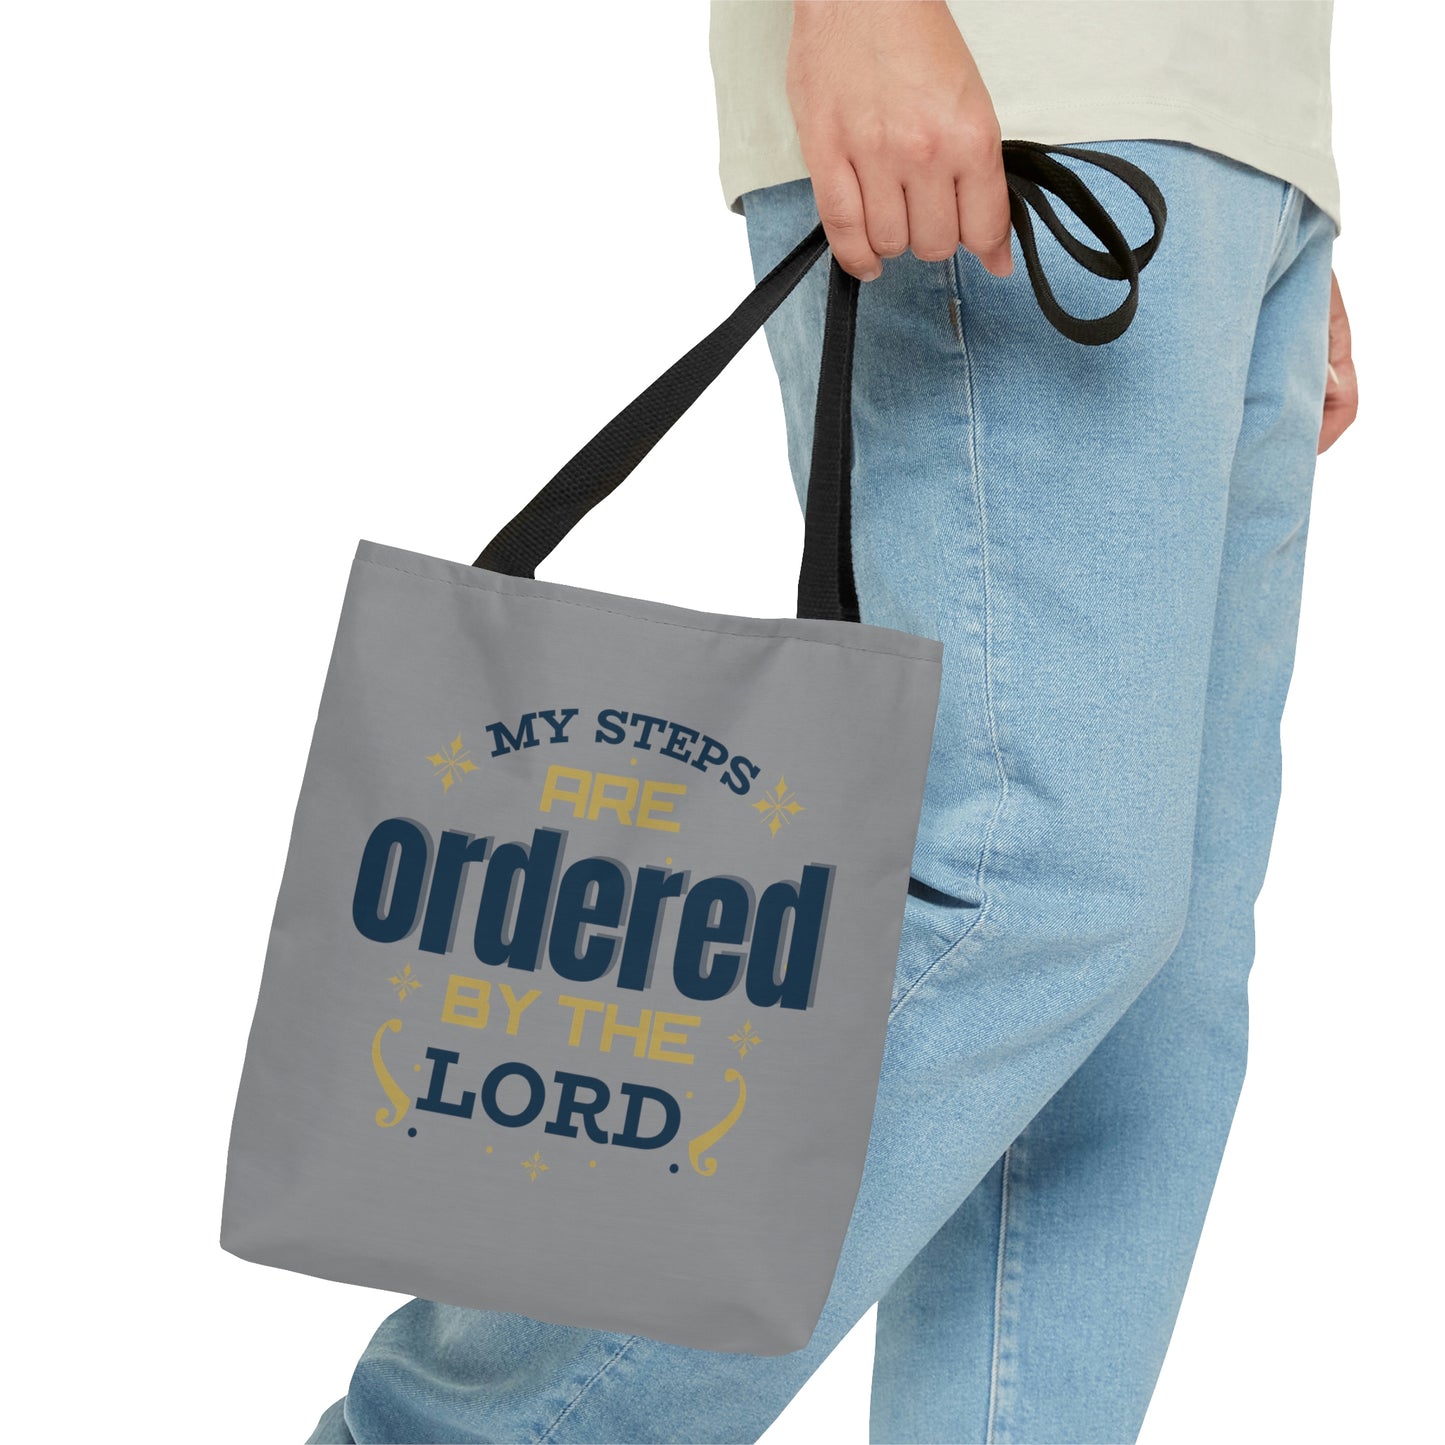 My Steps Are Ordered By The Lord Tote Bag